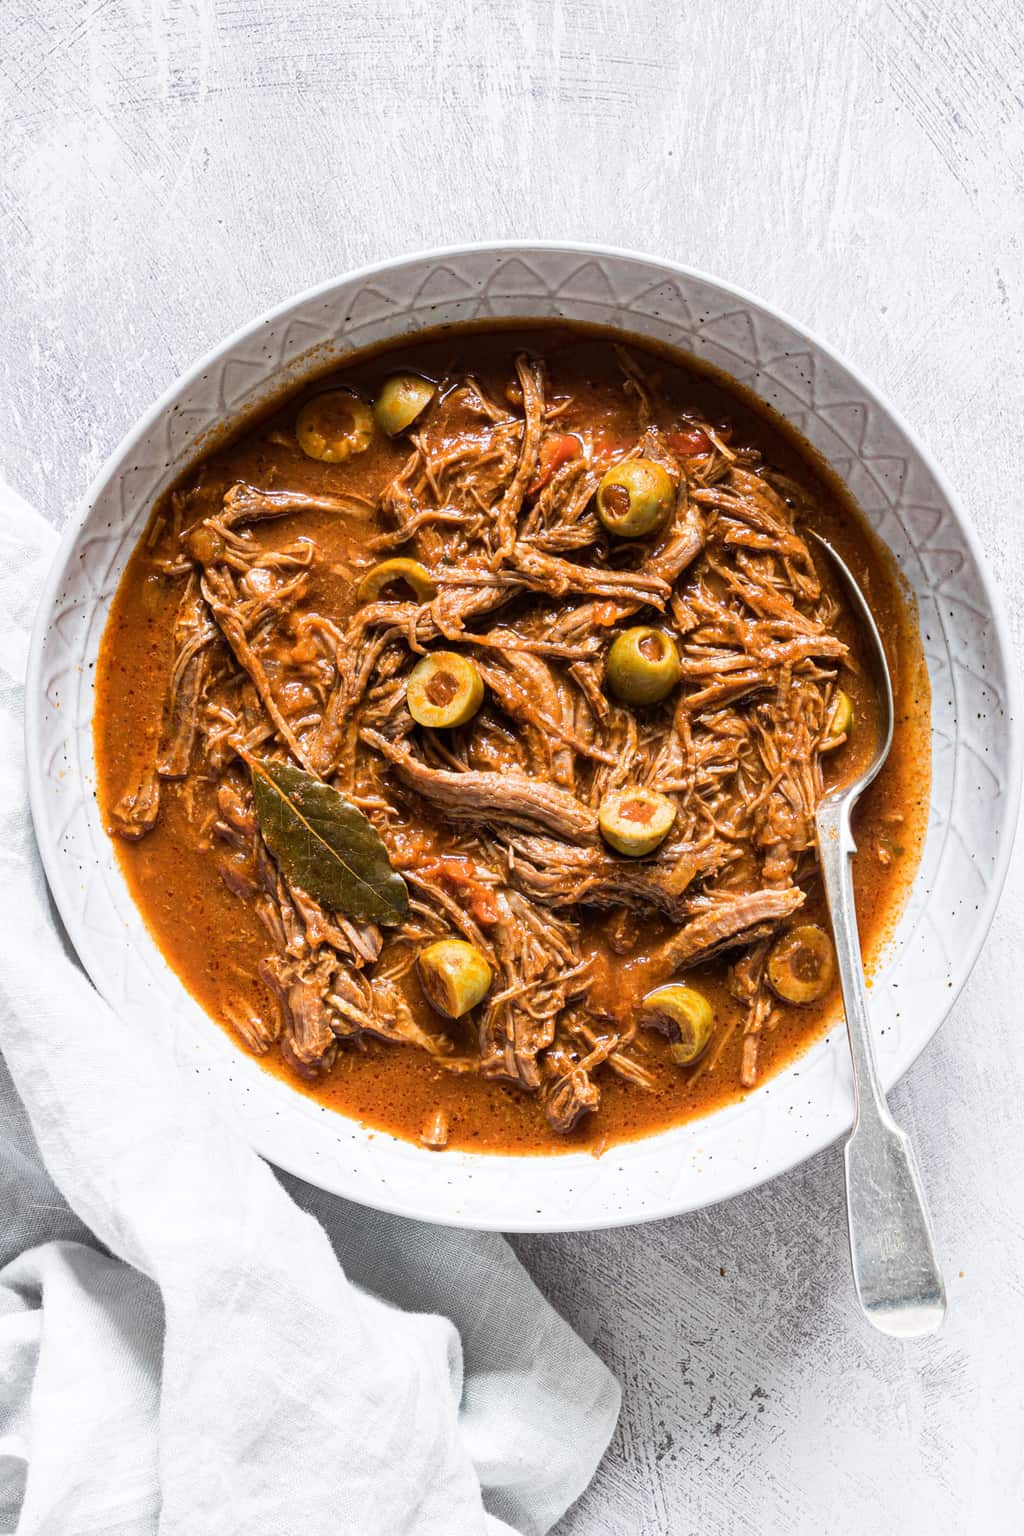 the ingredients needed to make this Instant Pot Ropa Vieja recipe